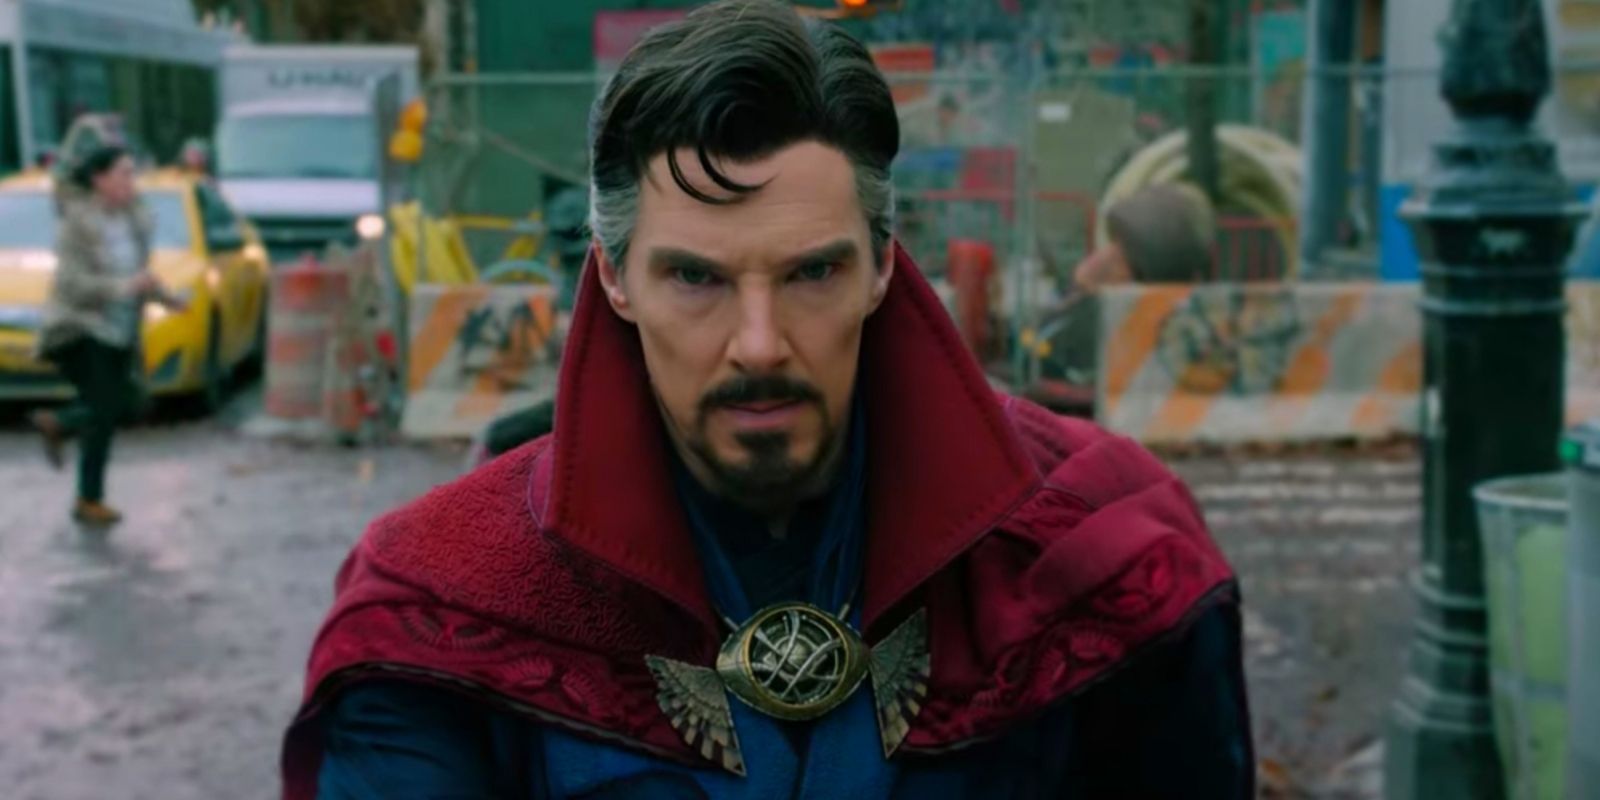 Doctor Strange is set in a multiverse madness against the backdrop of a city street.